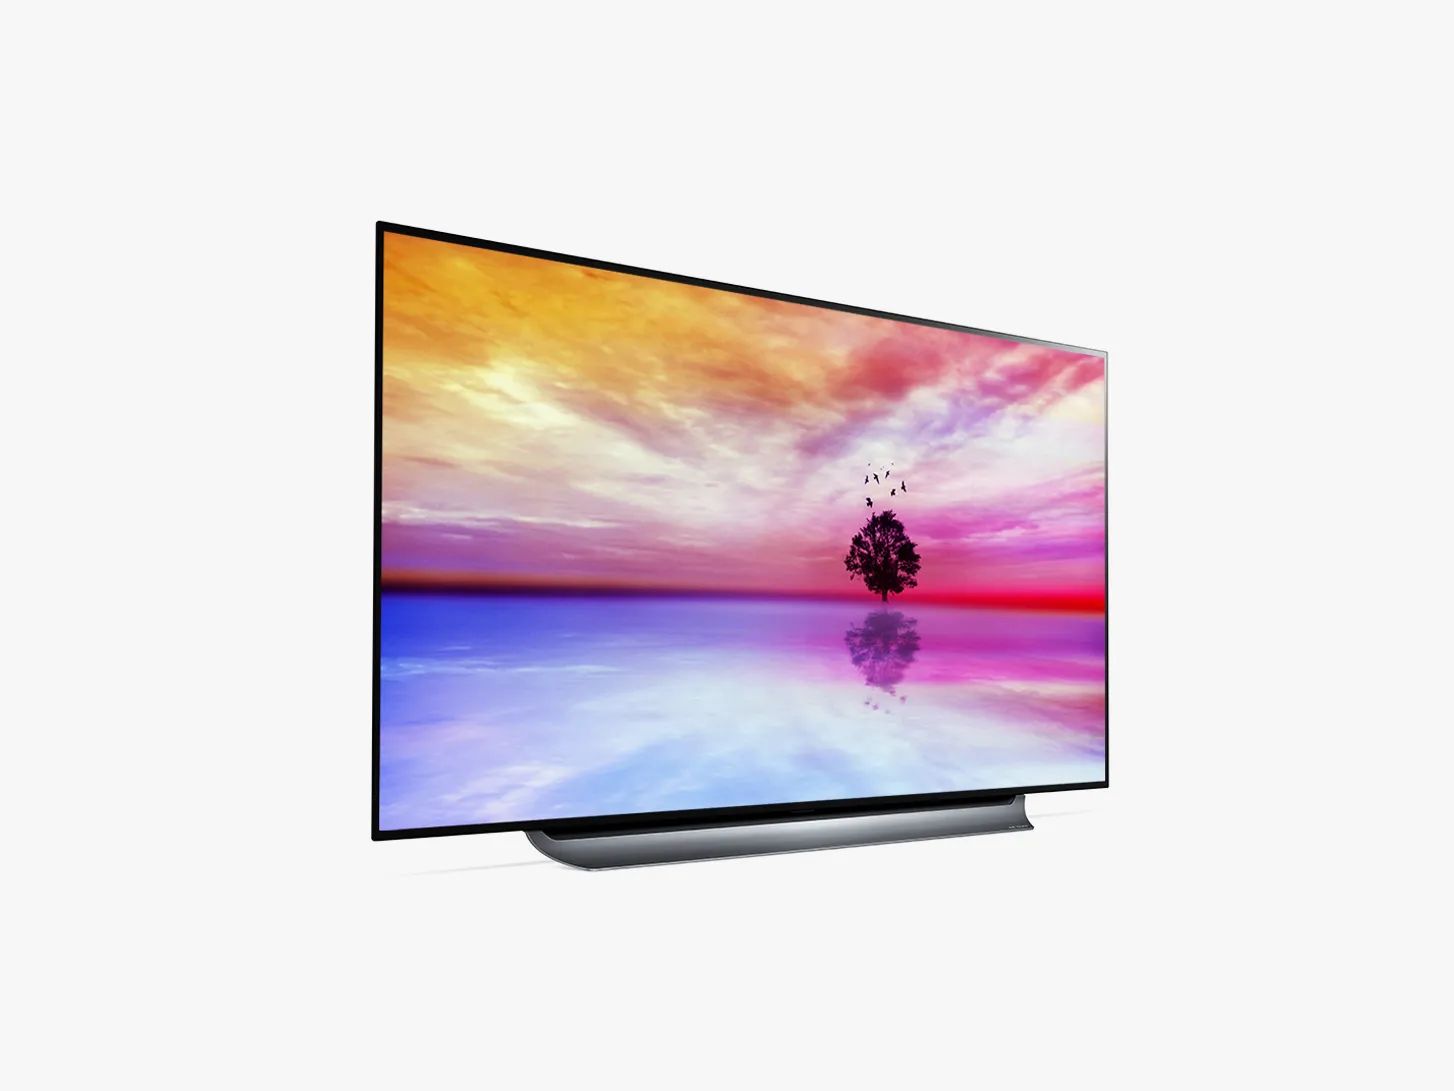 When Will 2018 LG OLED TV Be Available